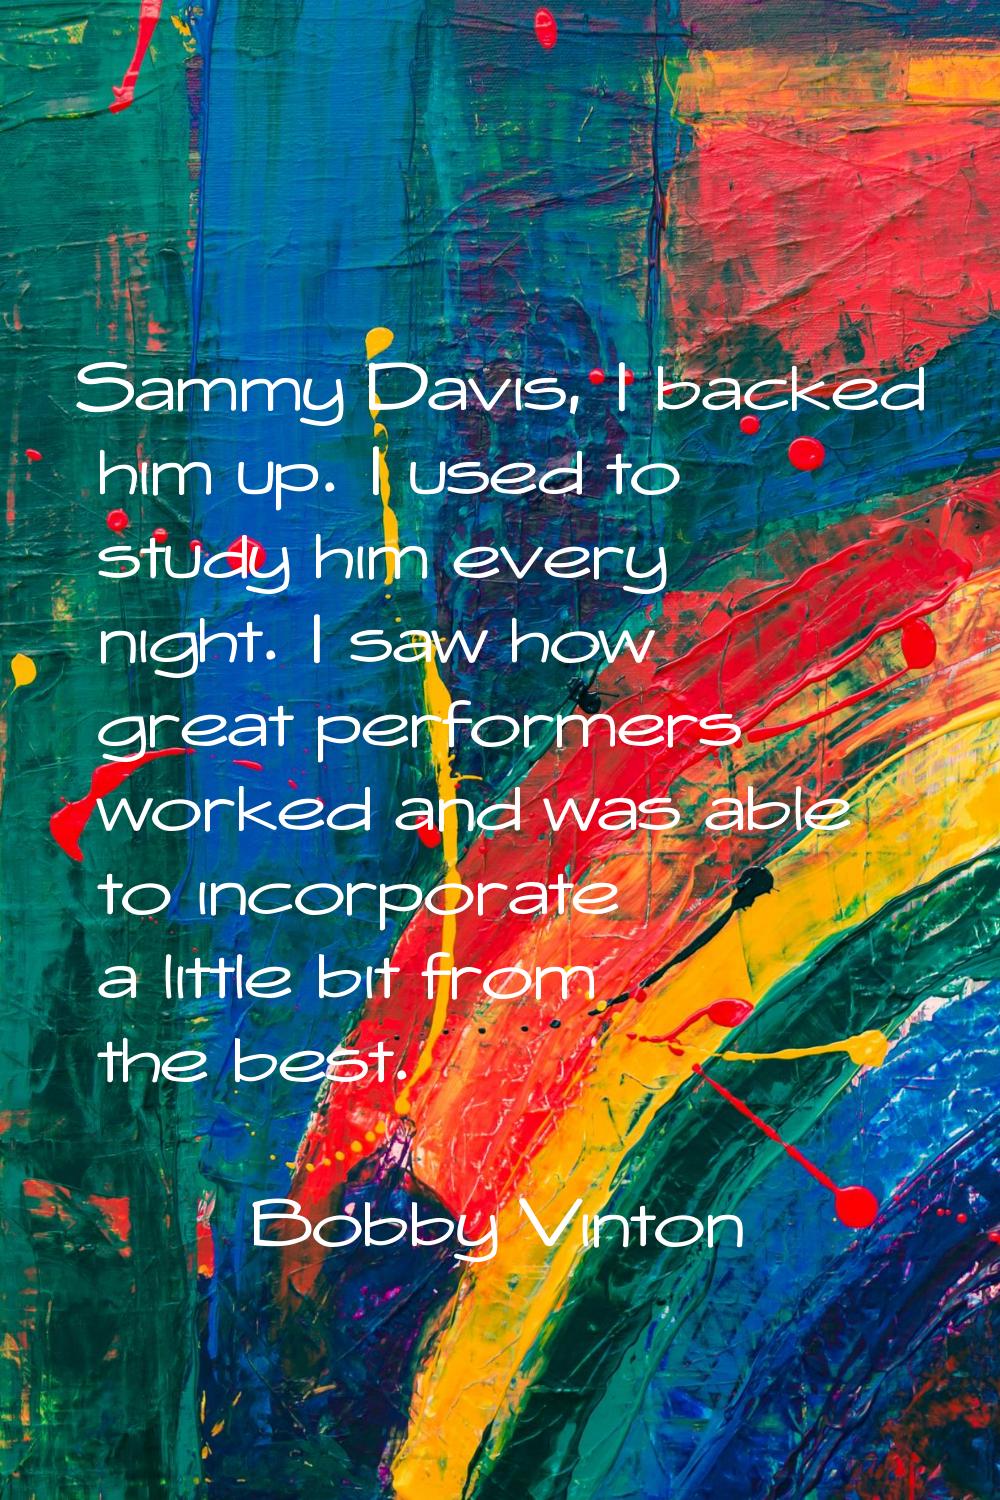 Sammy Davis, I backed him up. I used to study him every night. I saw how great performers worked an